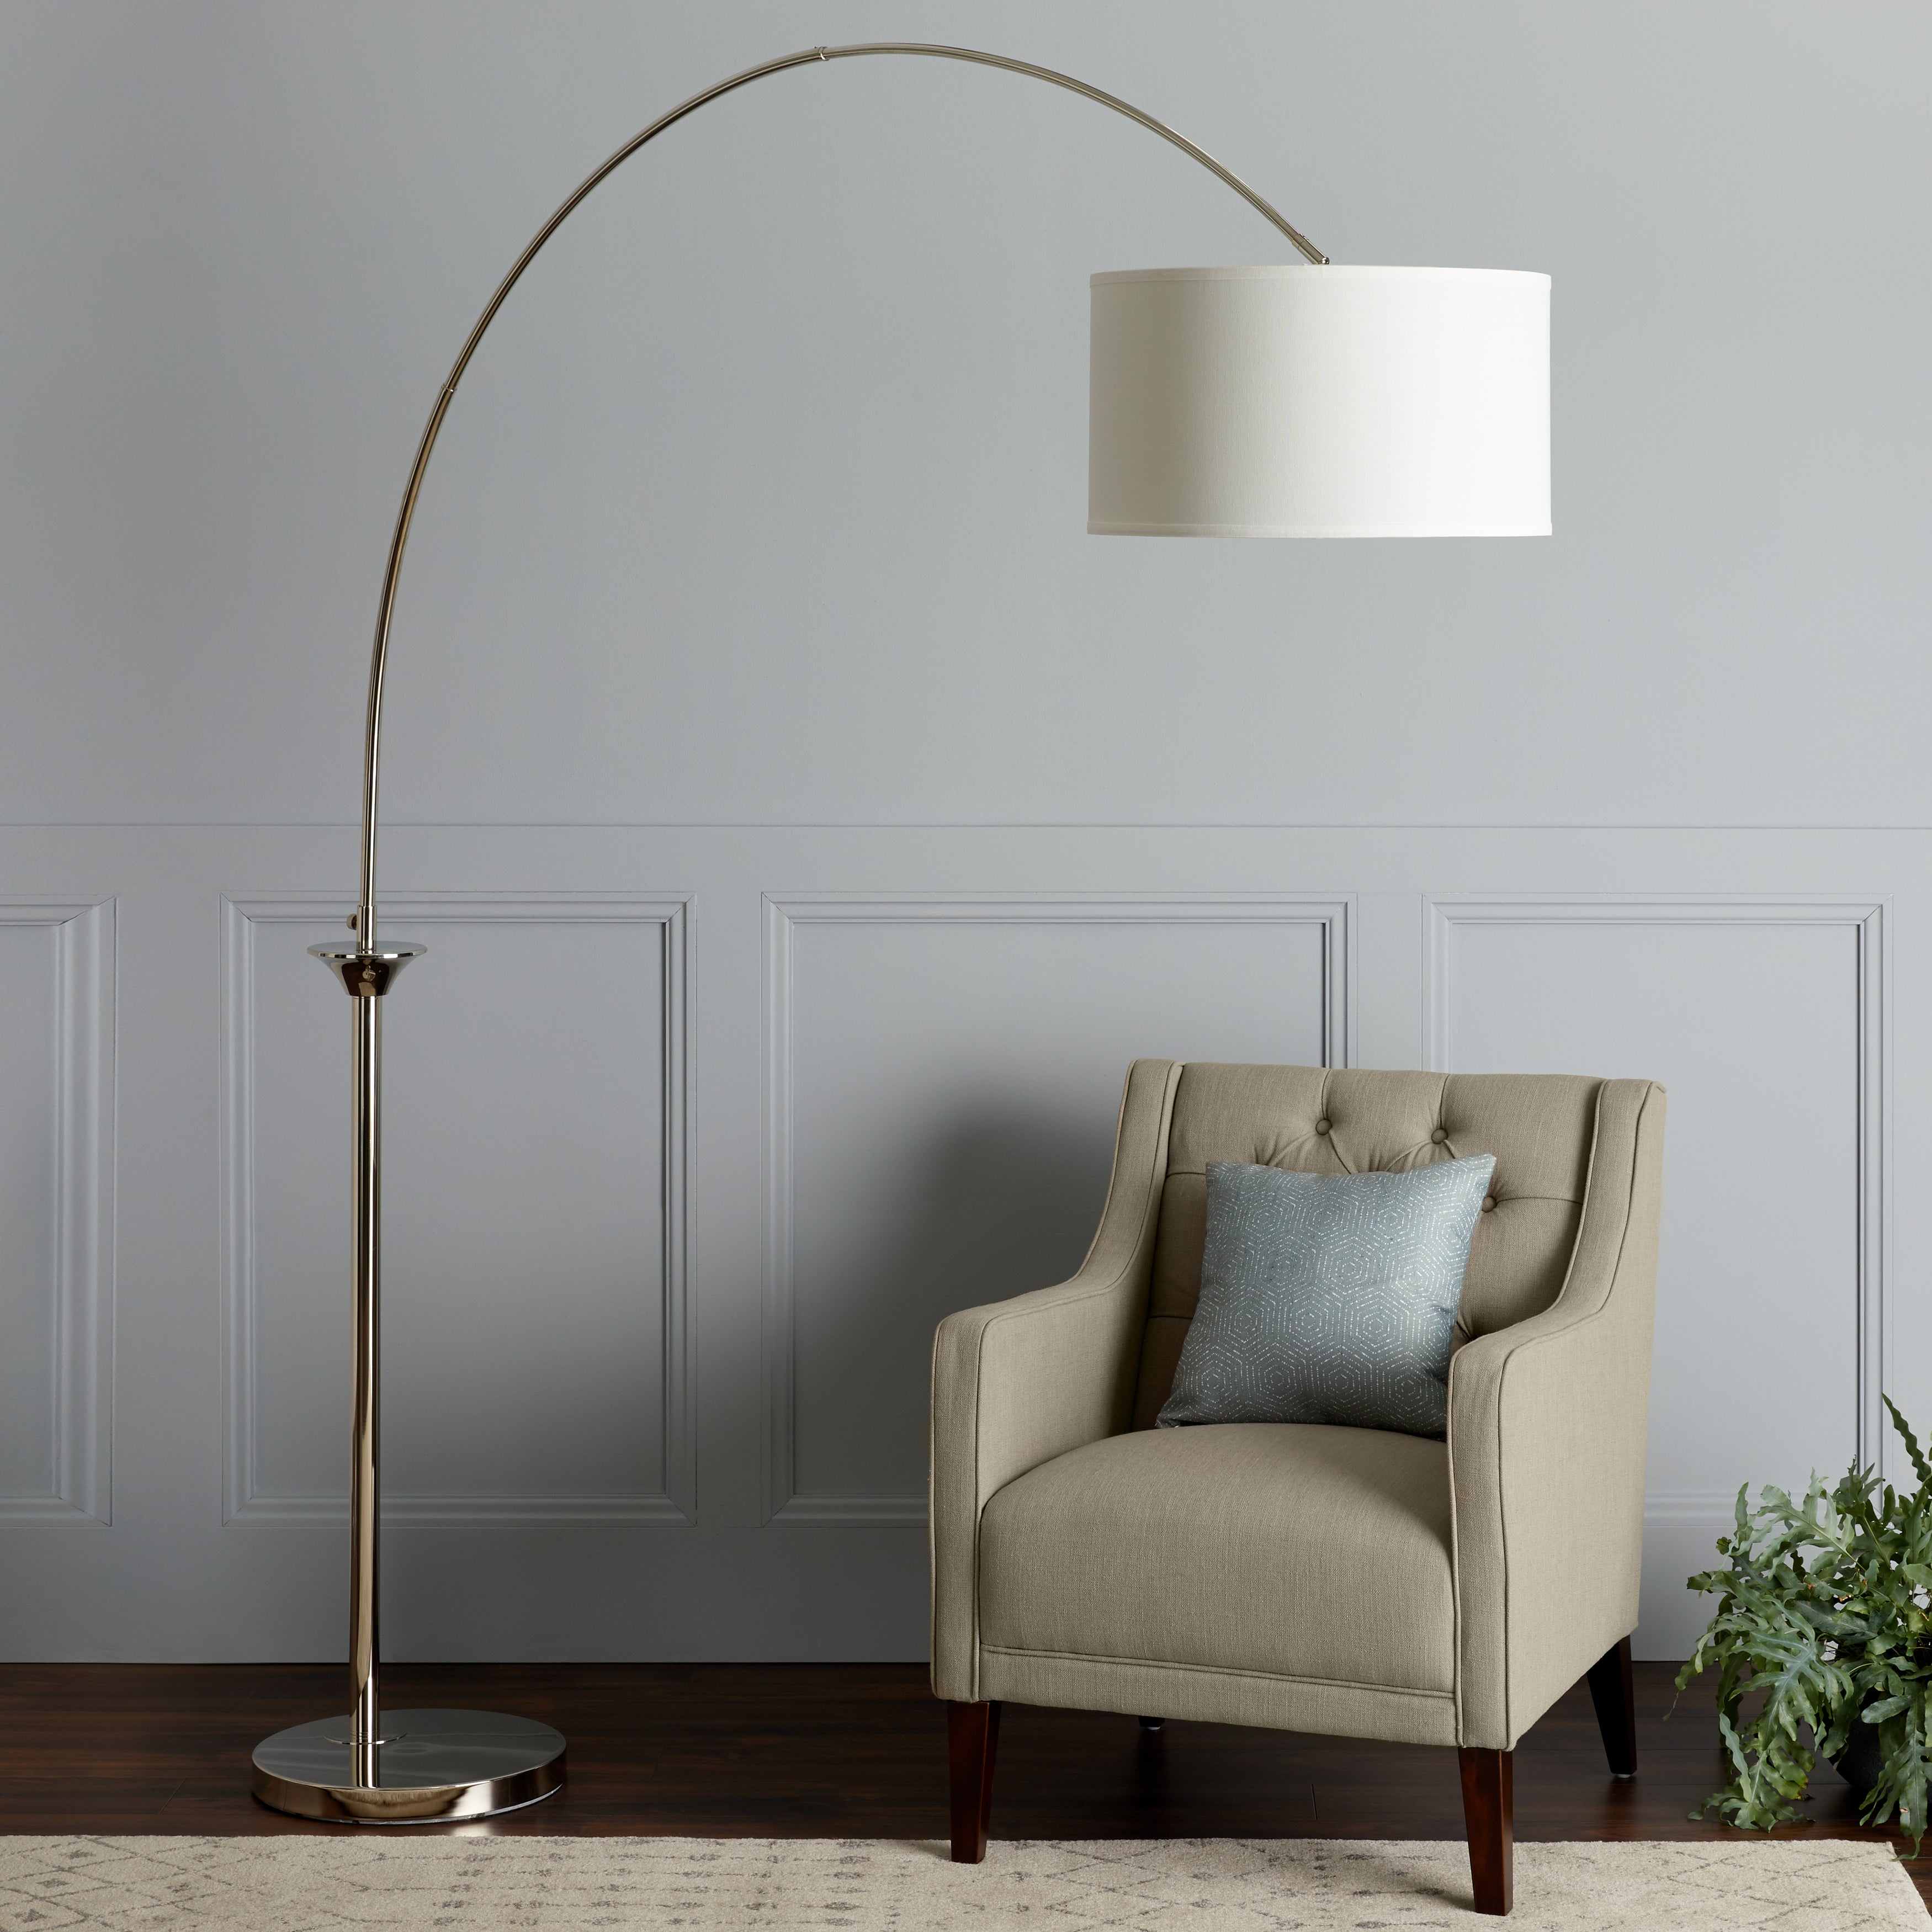 Floor Lamps Arc pertaining to size 3500 X 3500